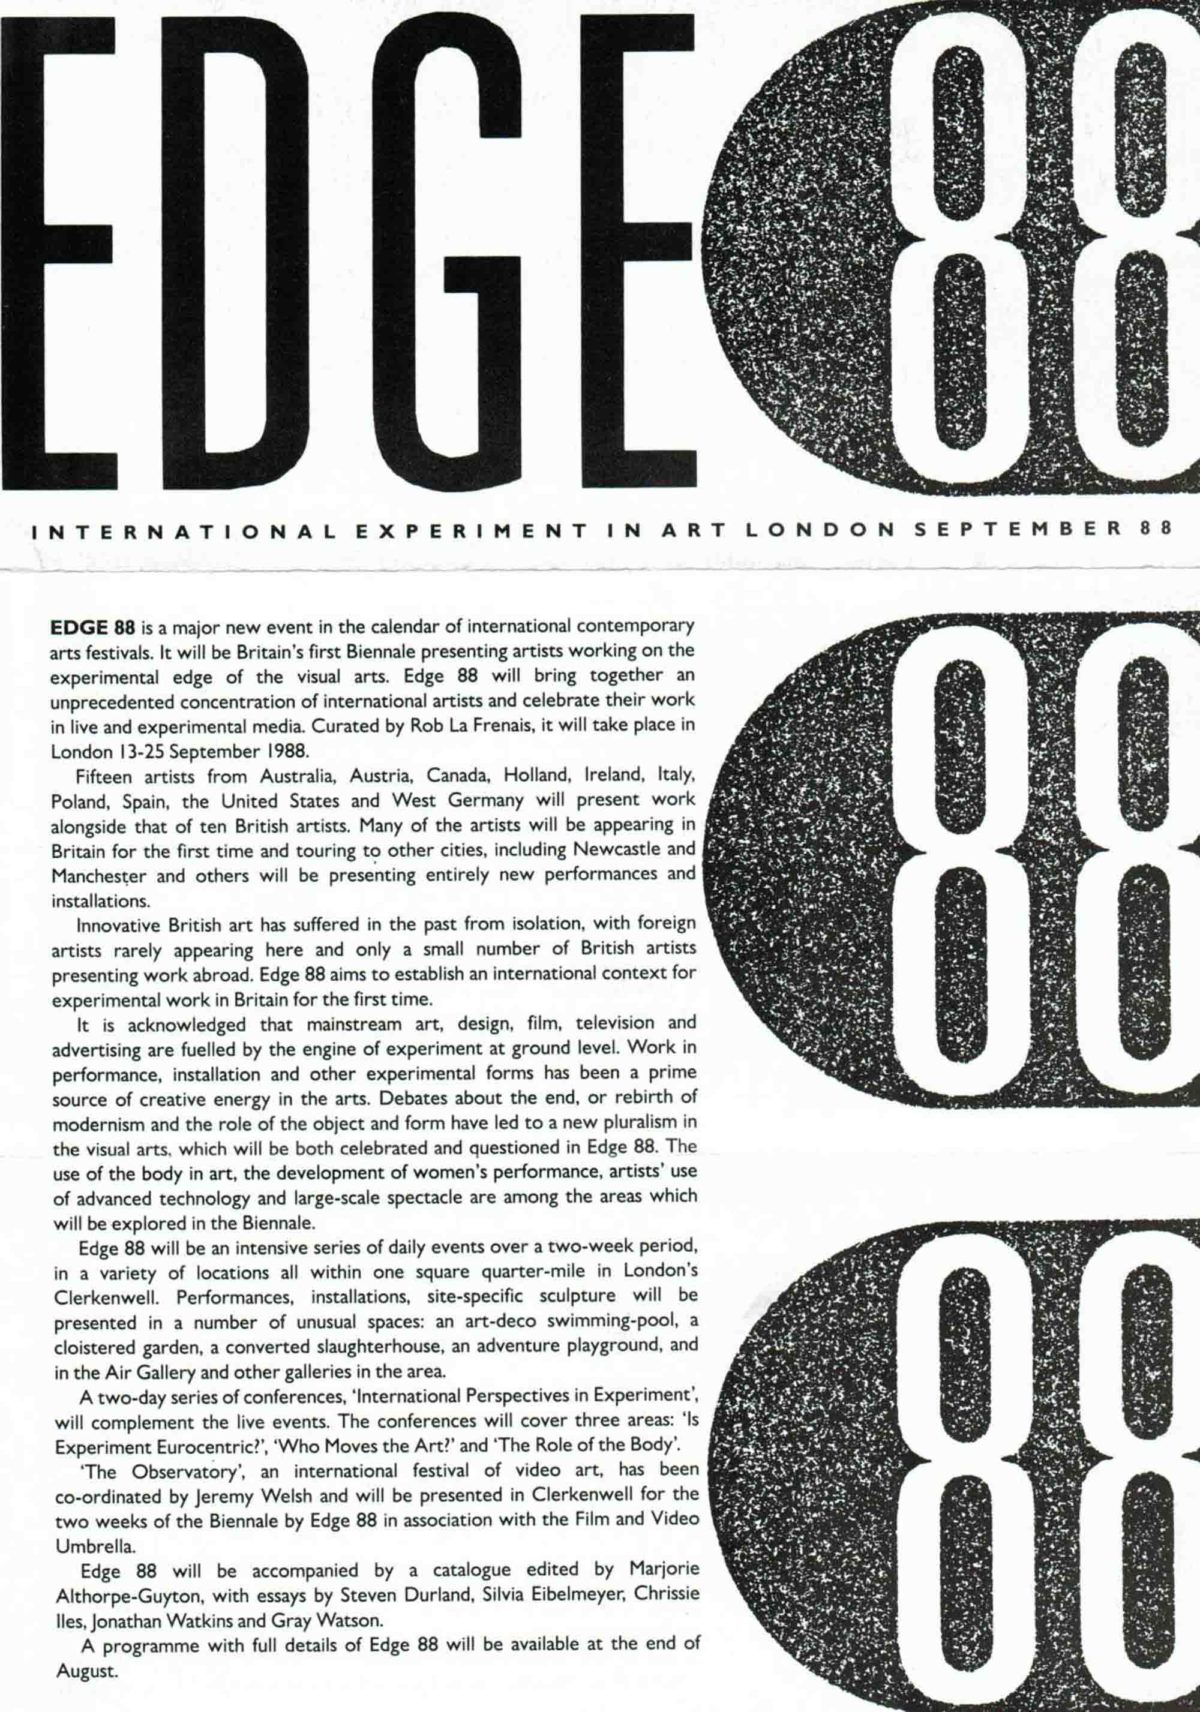 EDGE 88 Brochure, 1988 (Page 1 of 2)